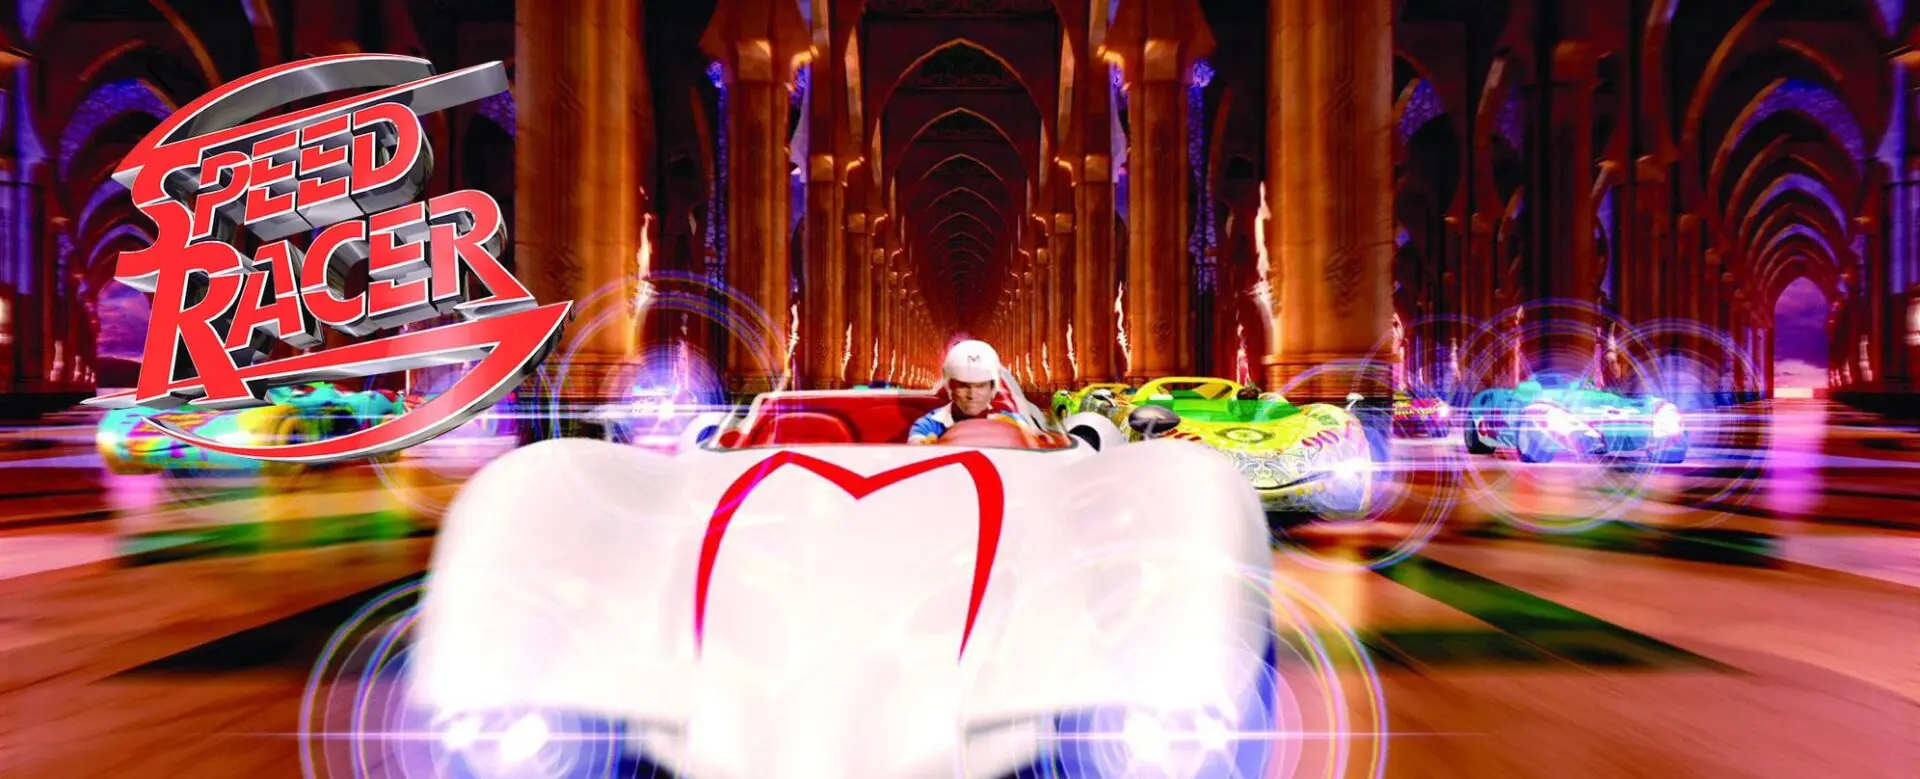 speed racer live action movie banner